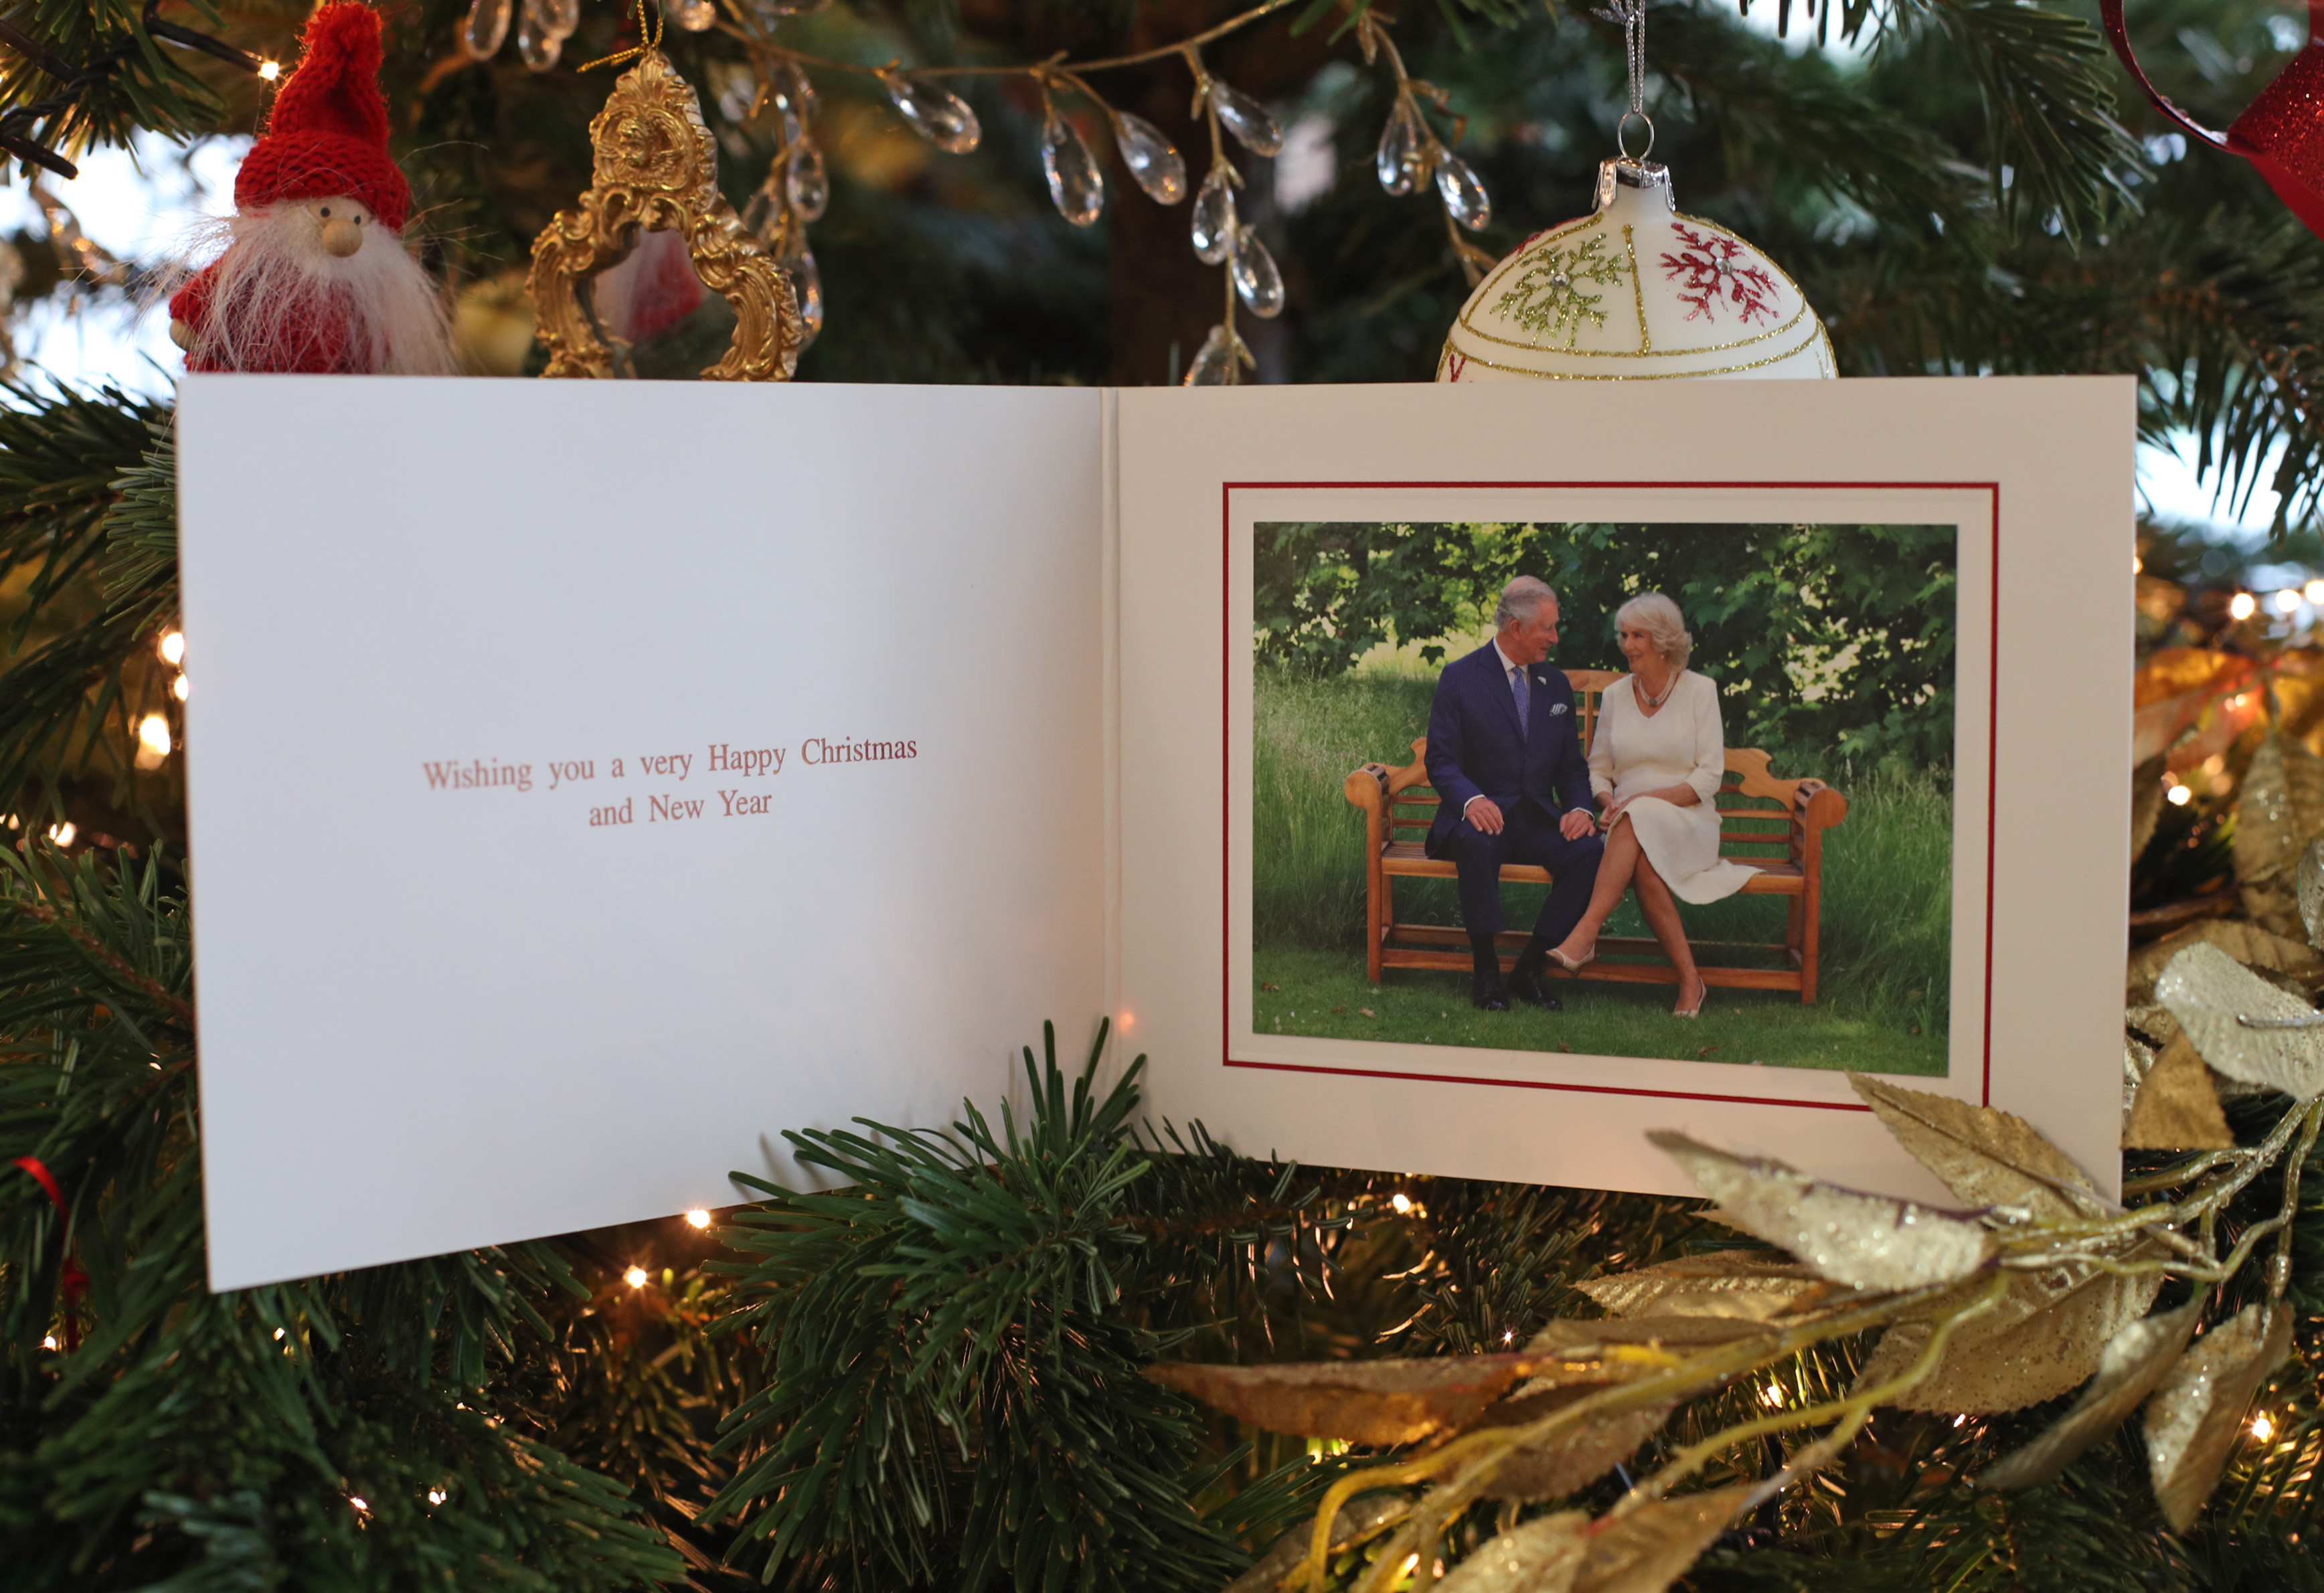 Prince William and Kate Middleton's Christmas Cards Through the Years